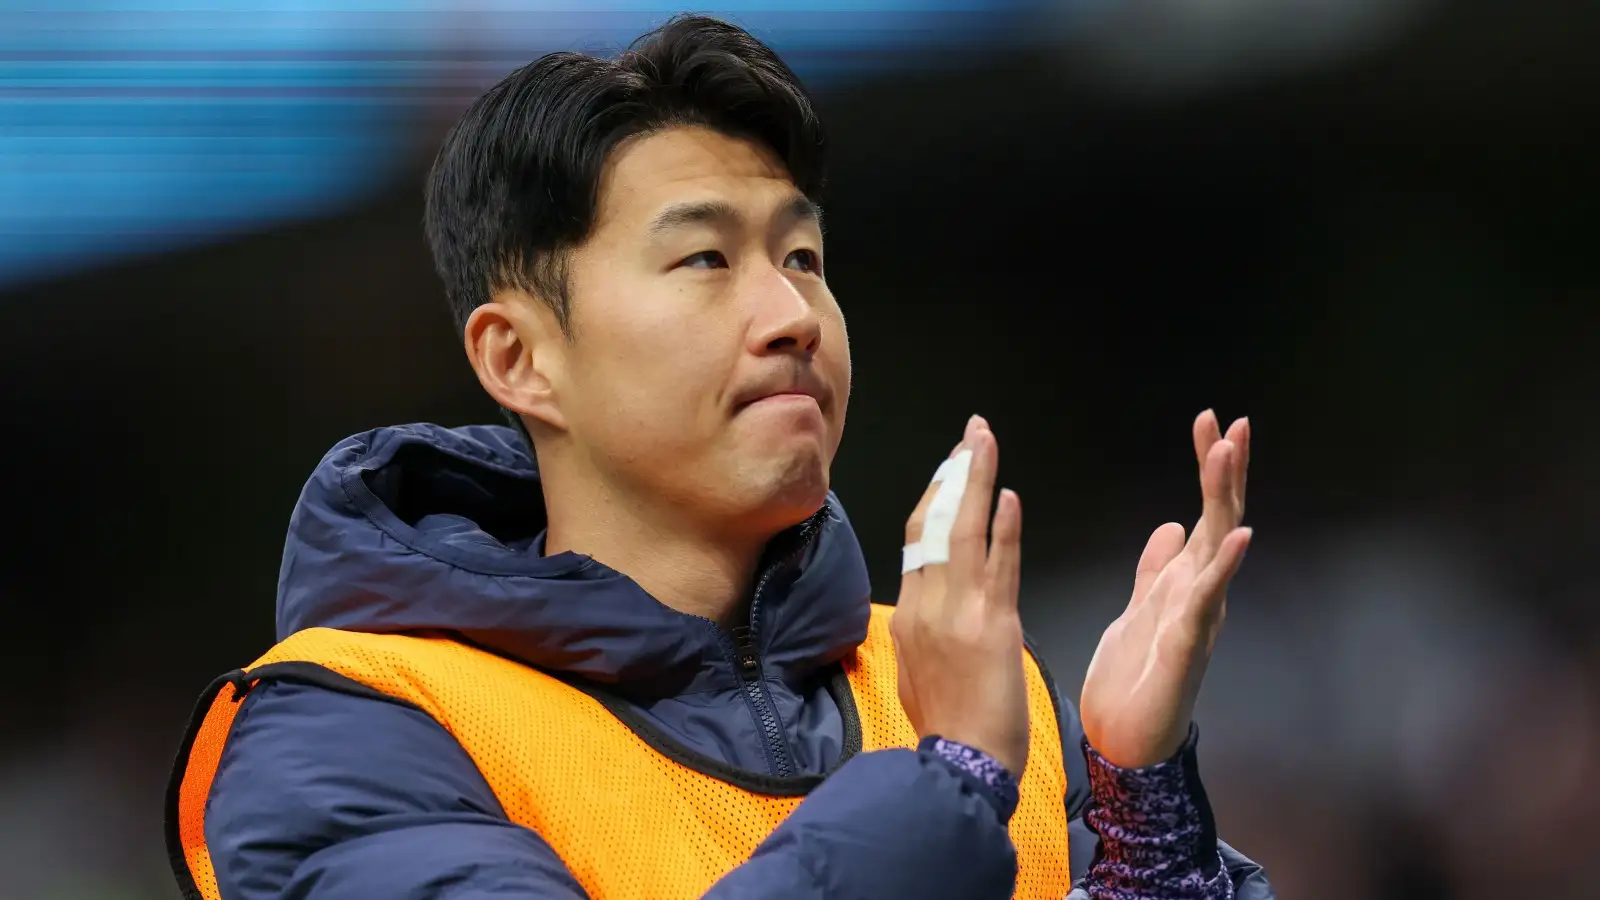 South Korea teammate denies throwing punch at Son Heung-min in finger incident